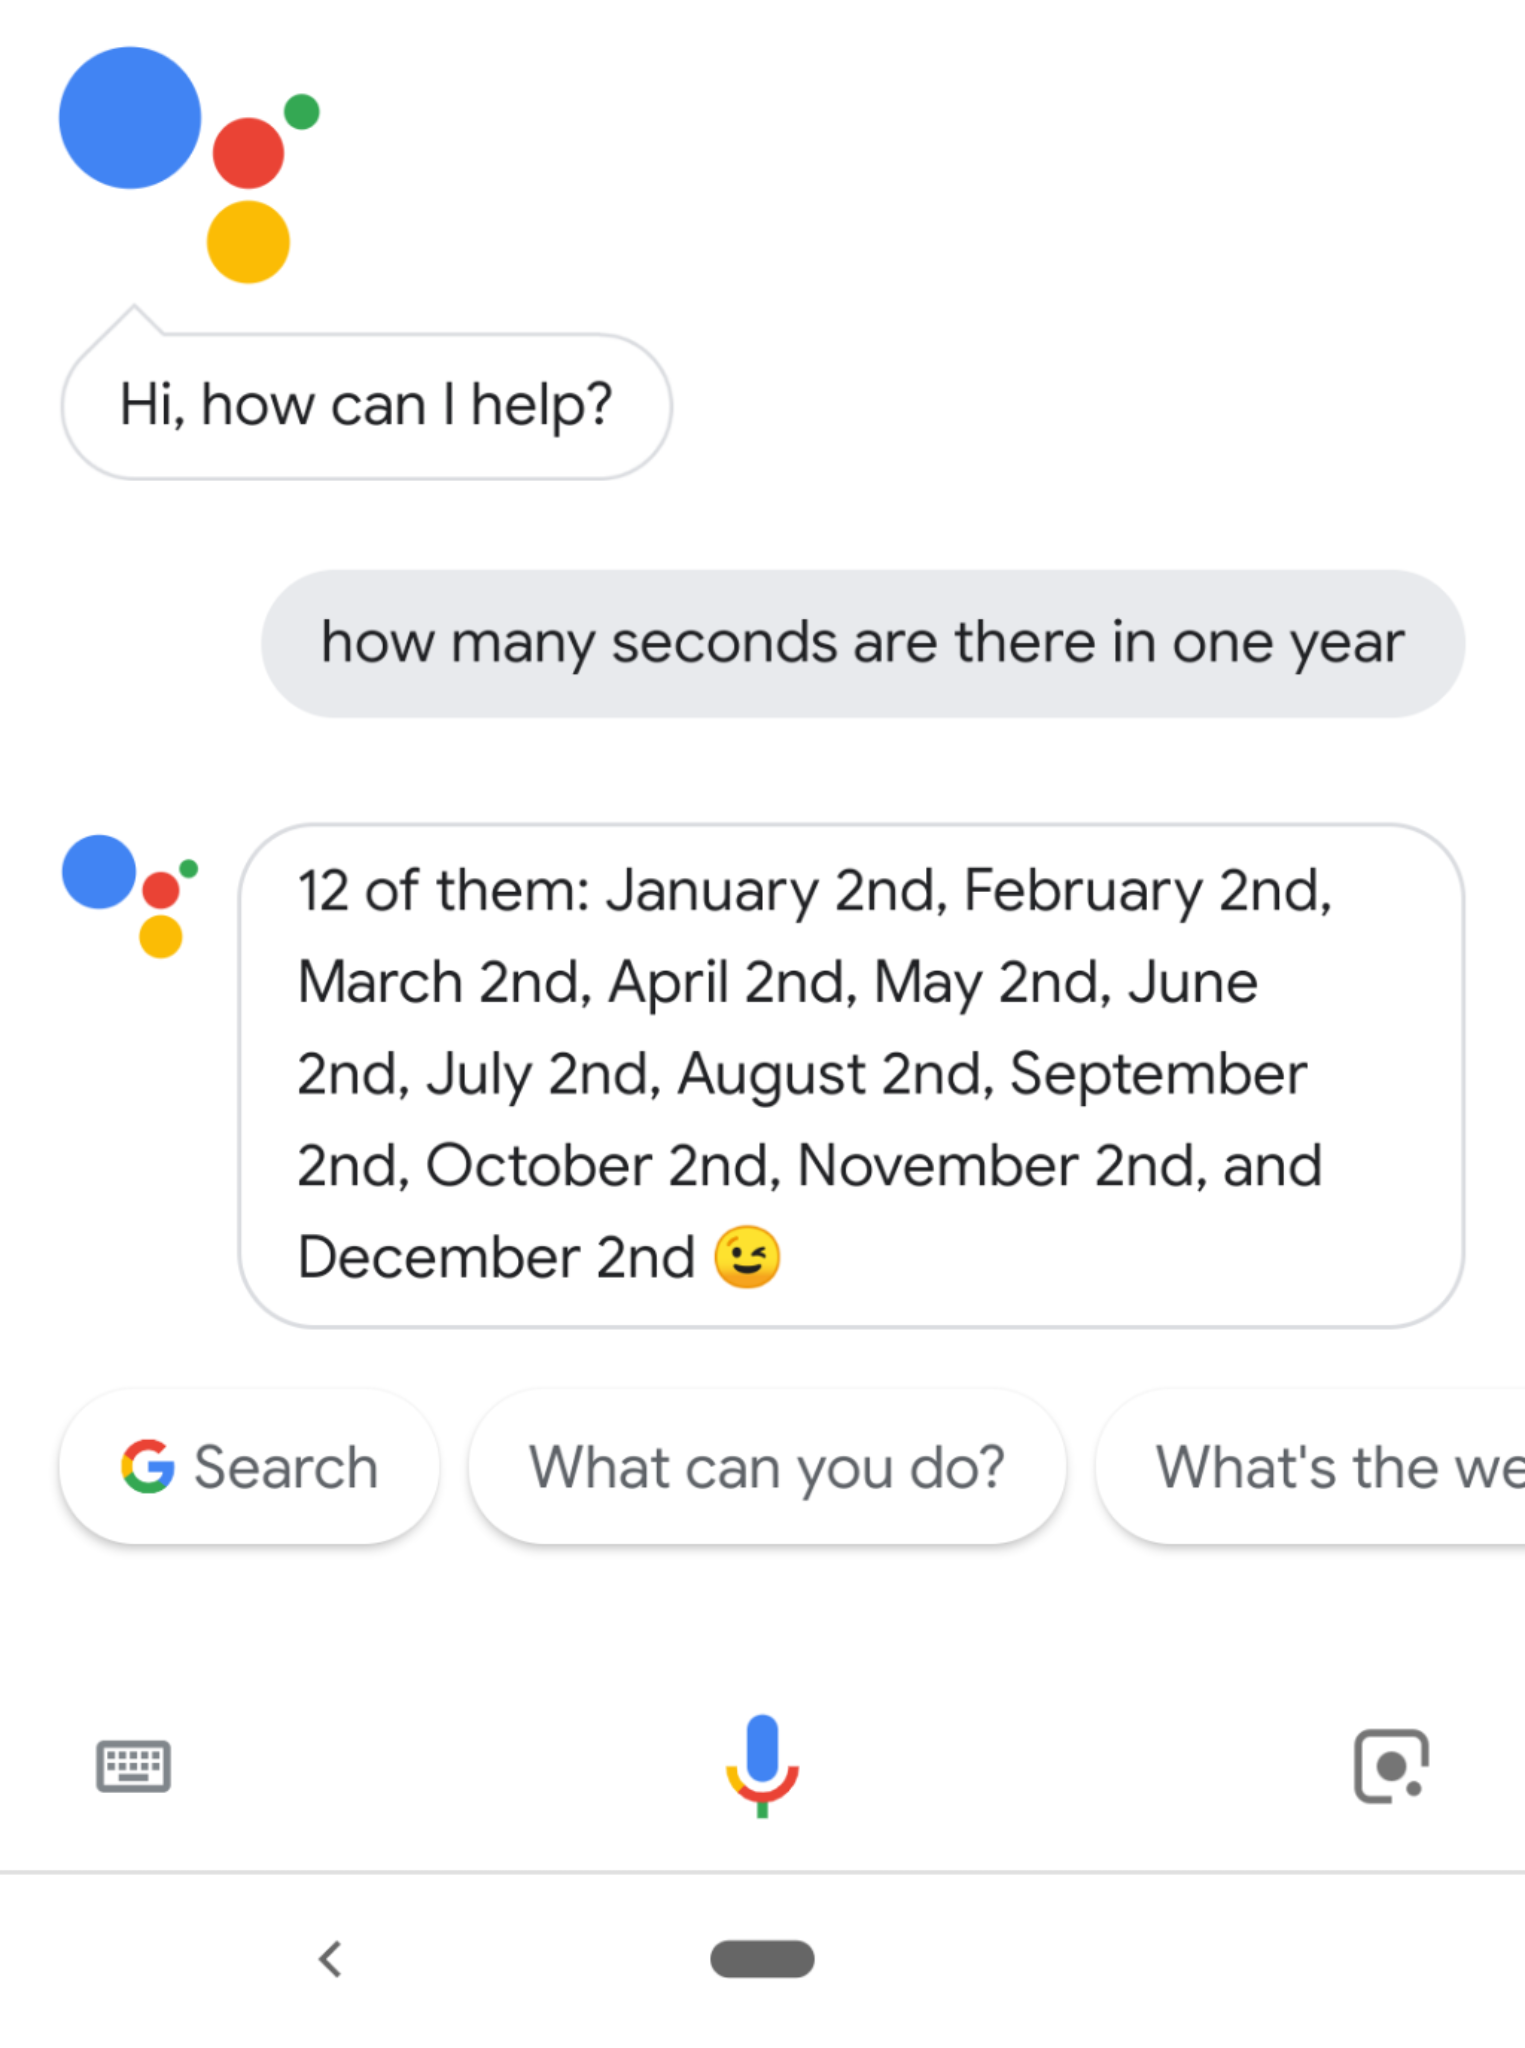 google - Hi, how can I help? how many seconds are there in one year 12 of them January 2nd, February 2nd, March 2nd, April 2nd, May 2nd, June 2nd, July 2nd, August 2nd, September 2nd, October 2nd, November 2nd, and December 2nd G Search What can you do? W